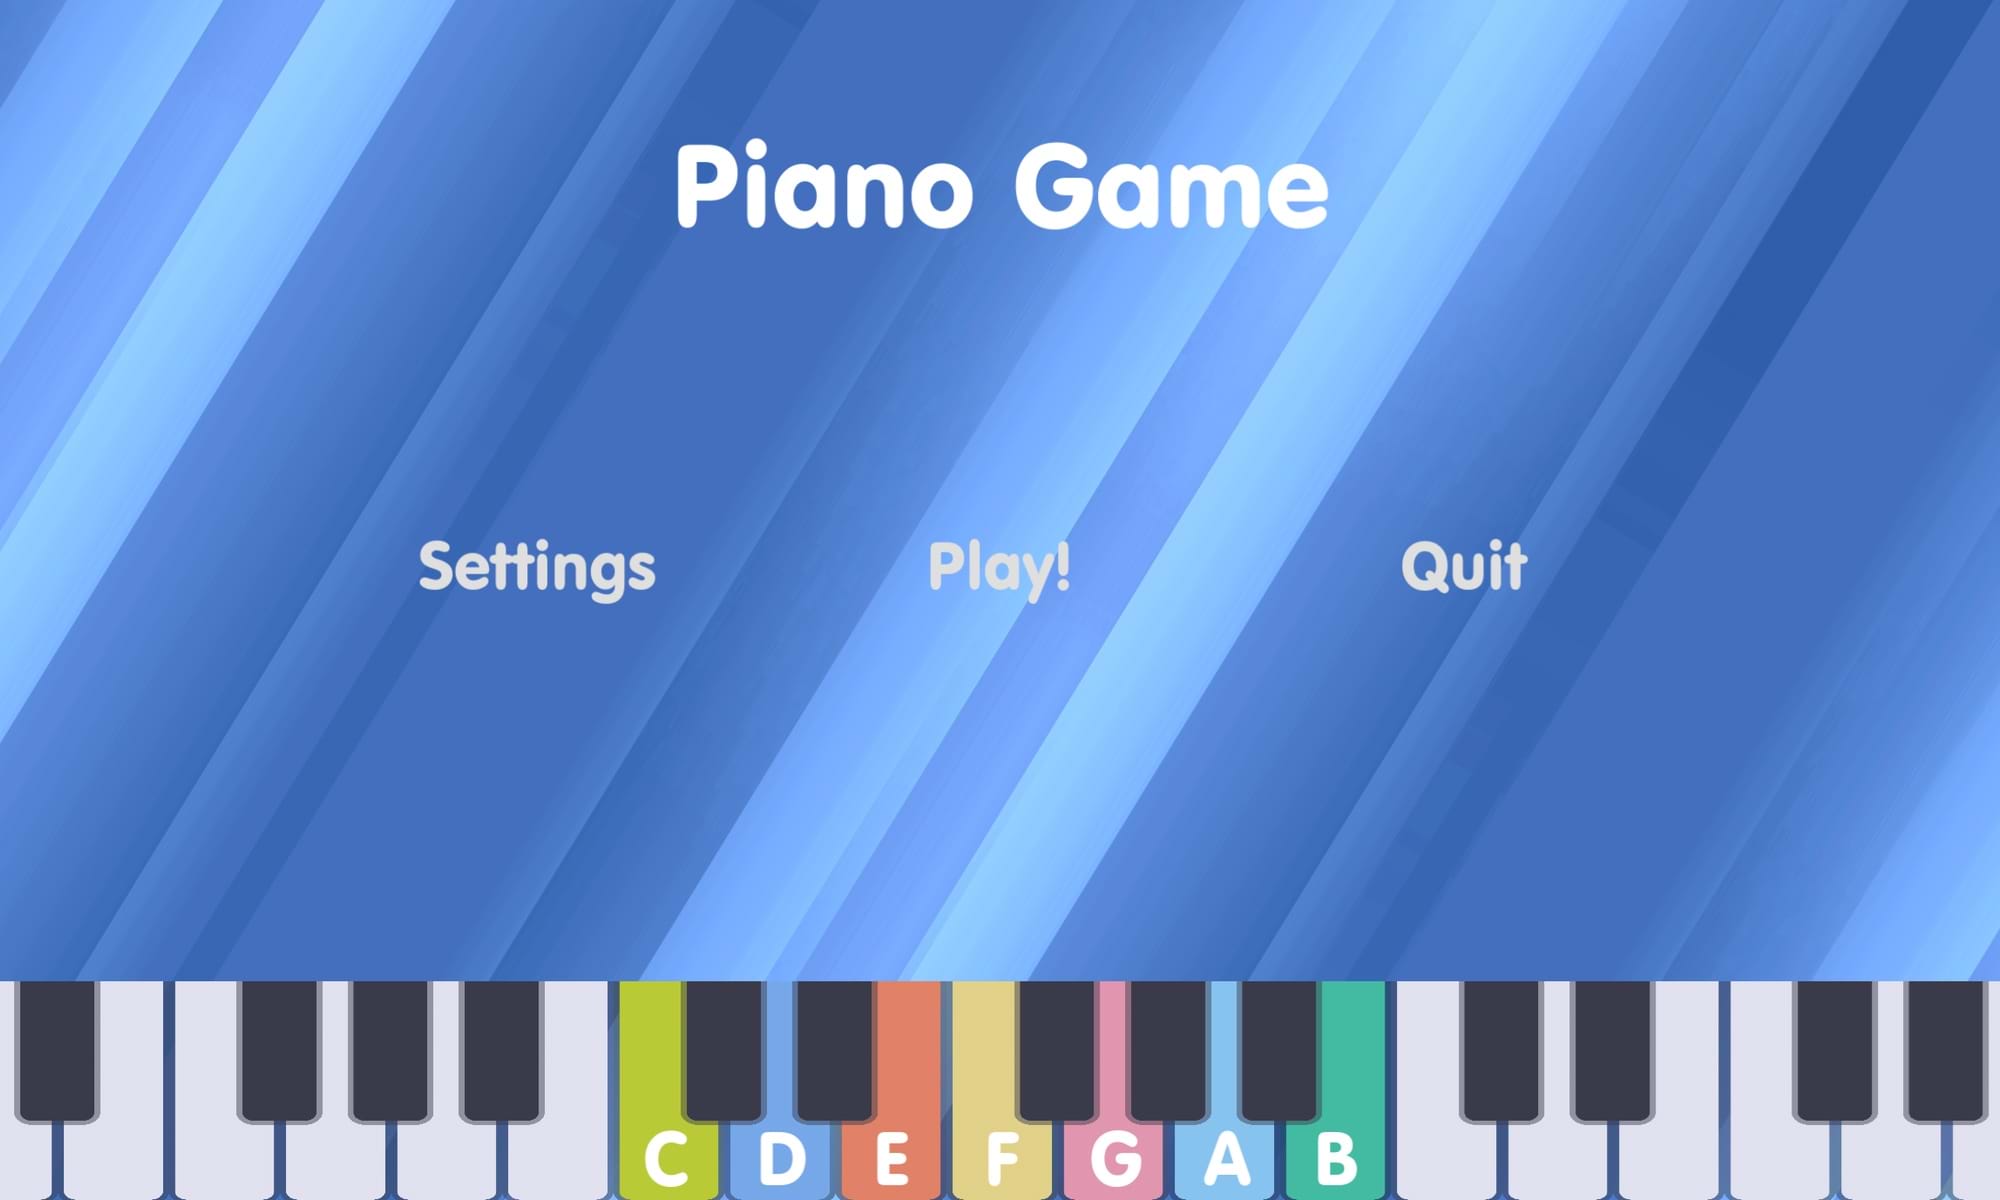 'Improving Accessibility in Piano Teaching through Video Games' is a 2023 Digital Graduate Show project by Calum Sarjeant, a Computer Game Applications Development student at Abertay University.